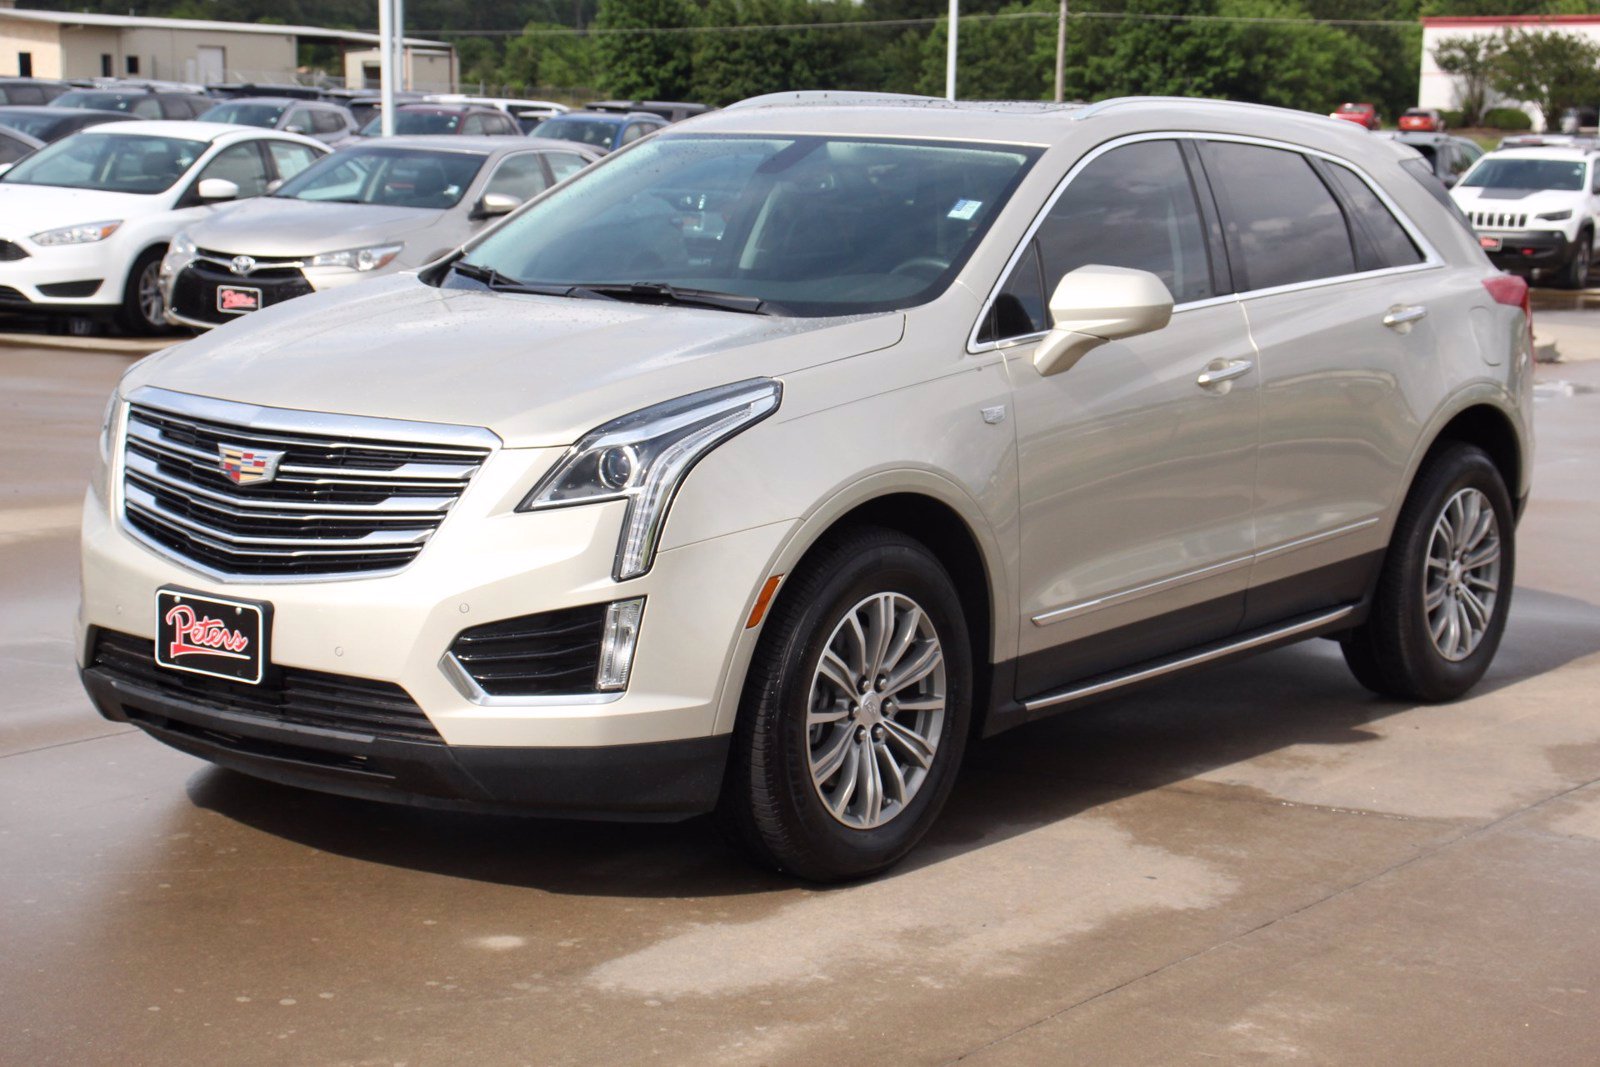 Pre-Owned 2017 Cadillac XT5 Luxury SUV in Longview #A4212 | Peters